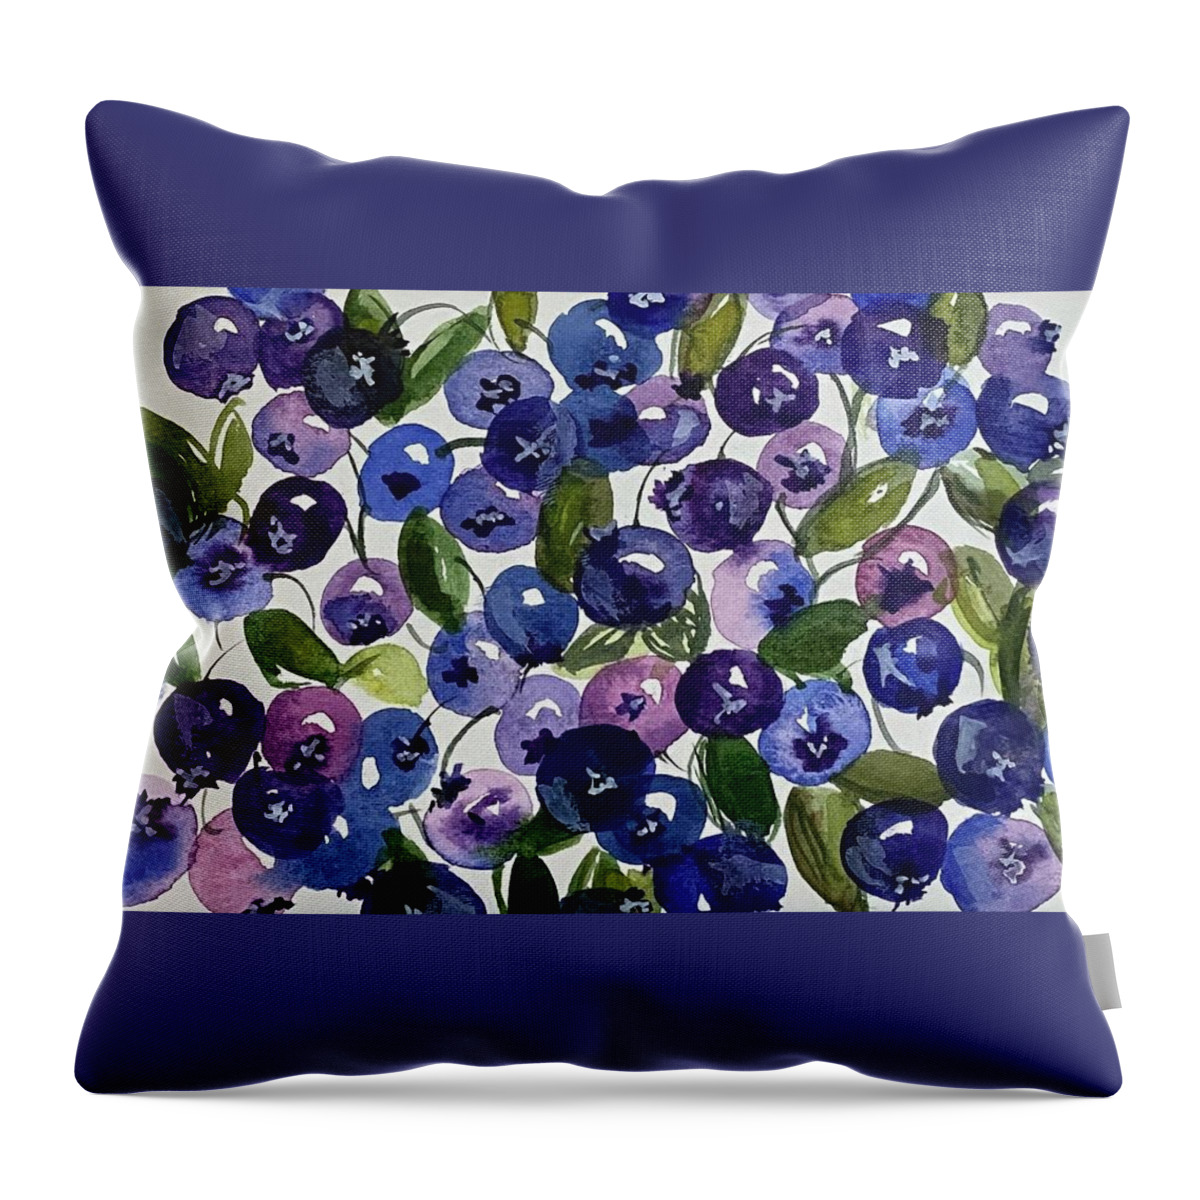 Wild Maine Blueberries Throw Pillow featuring the painting Wild Blueberries by Kellie Chasse